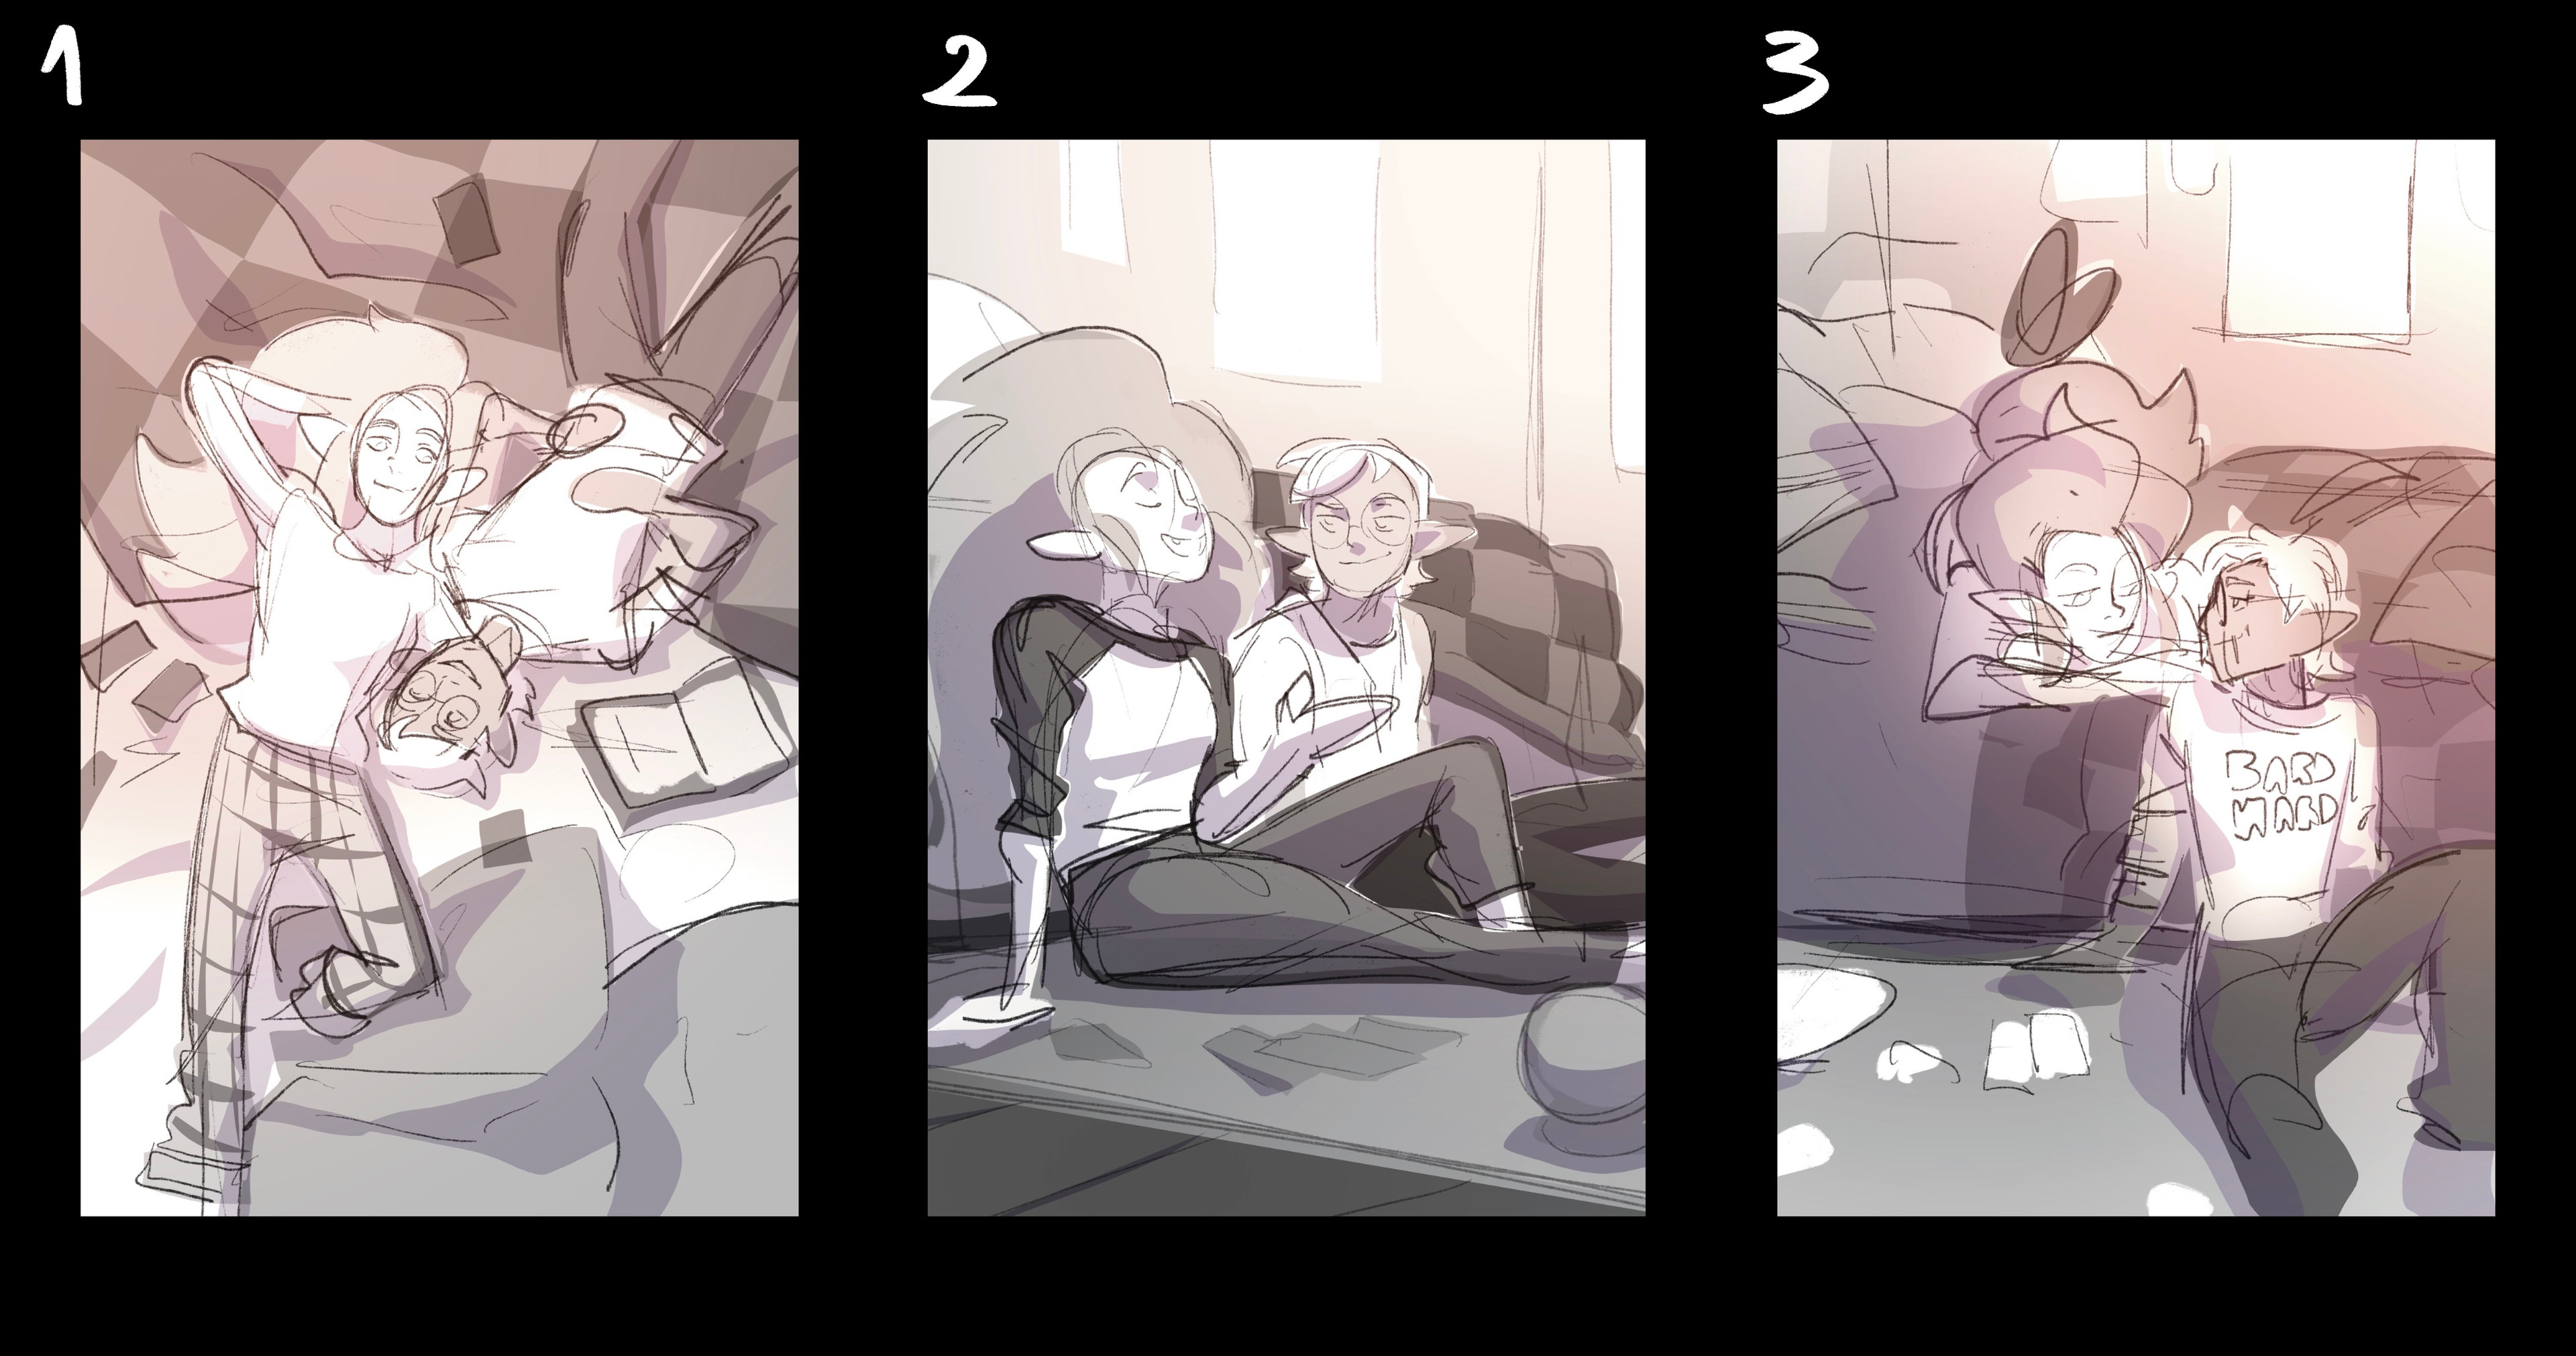 thumbnails for the illustration